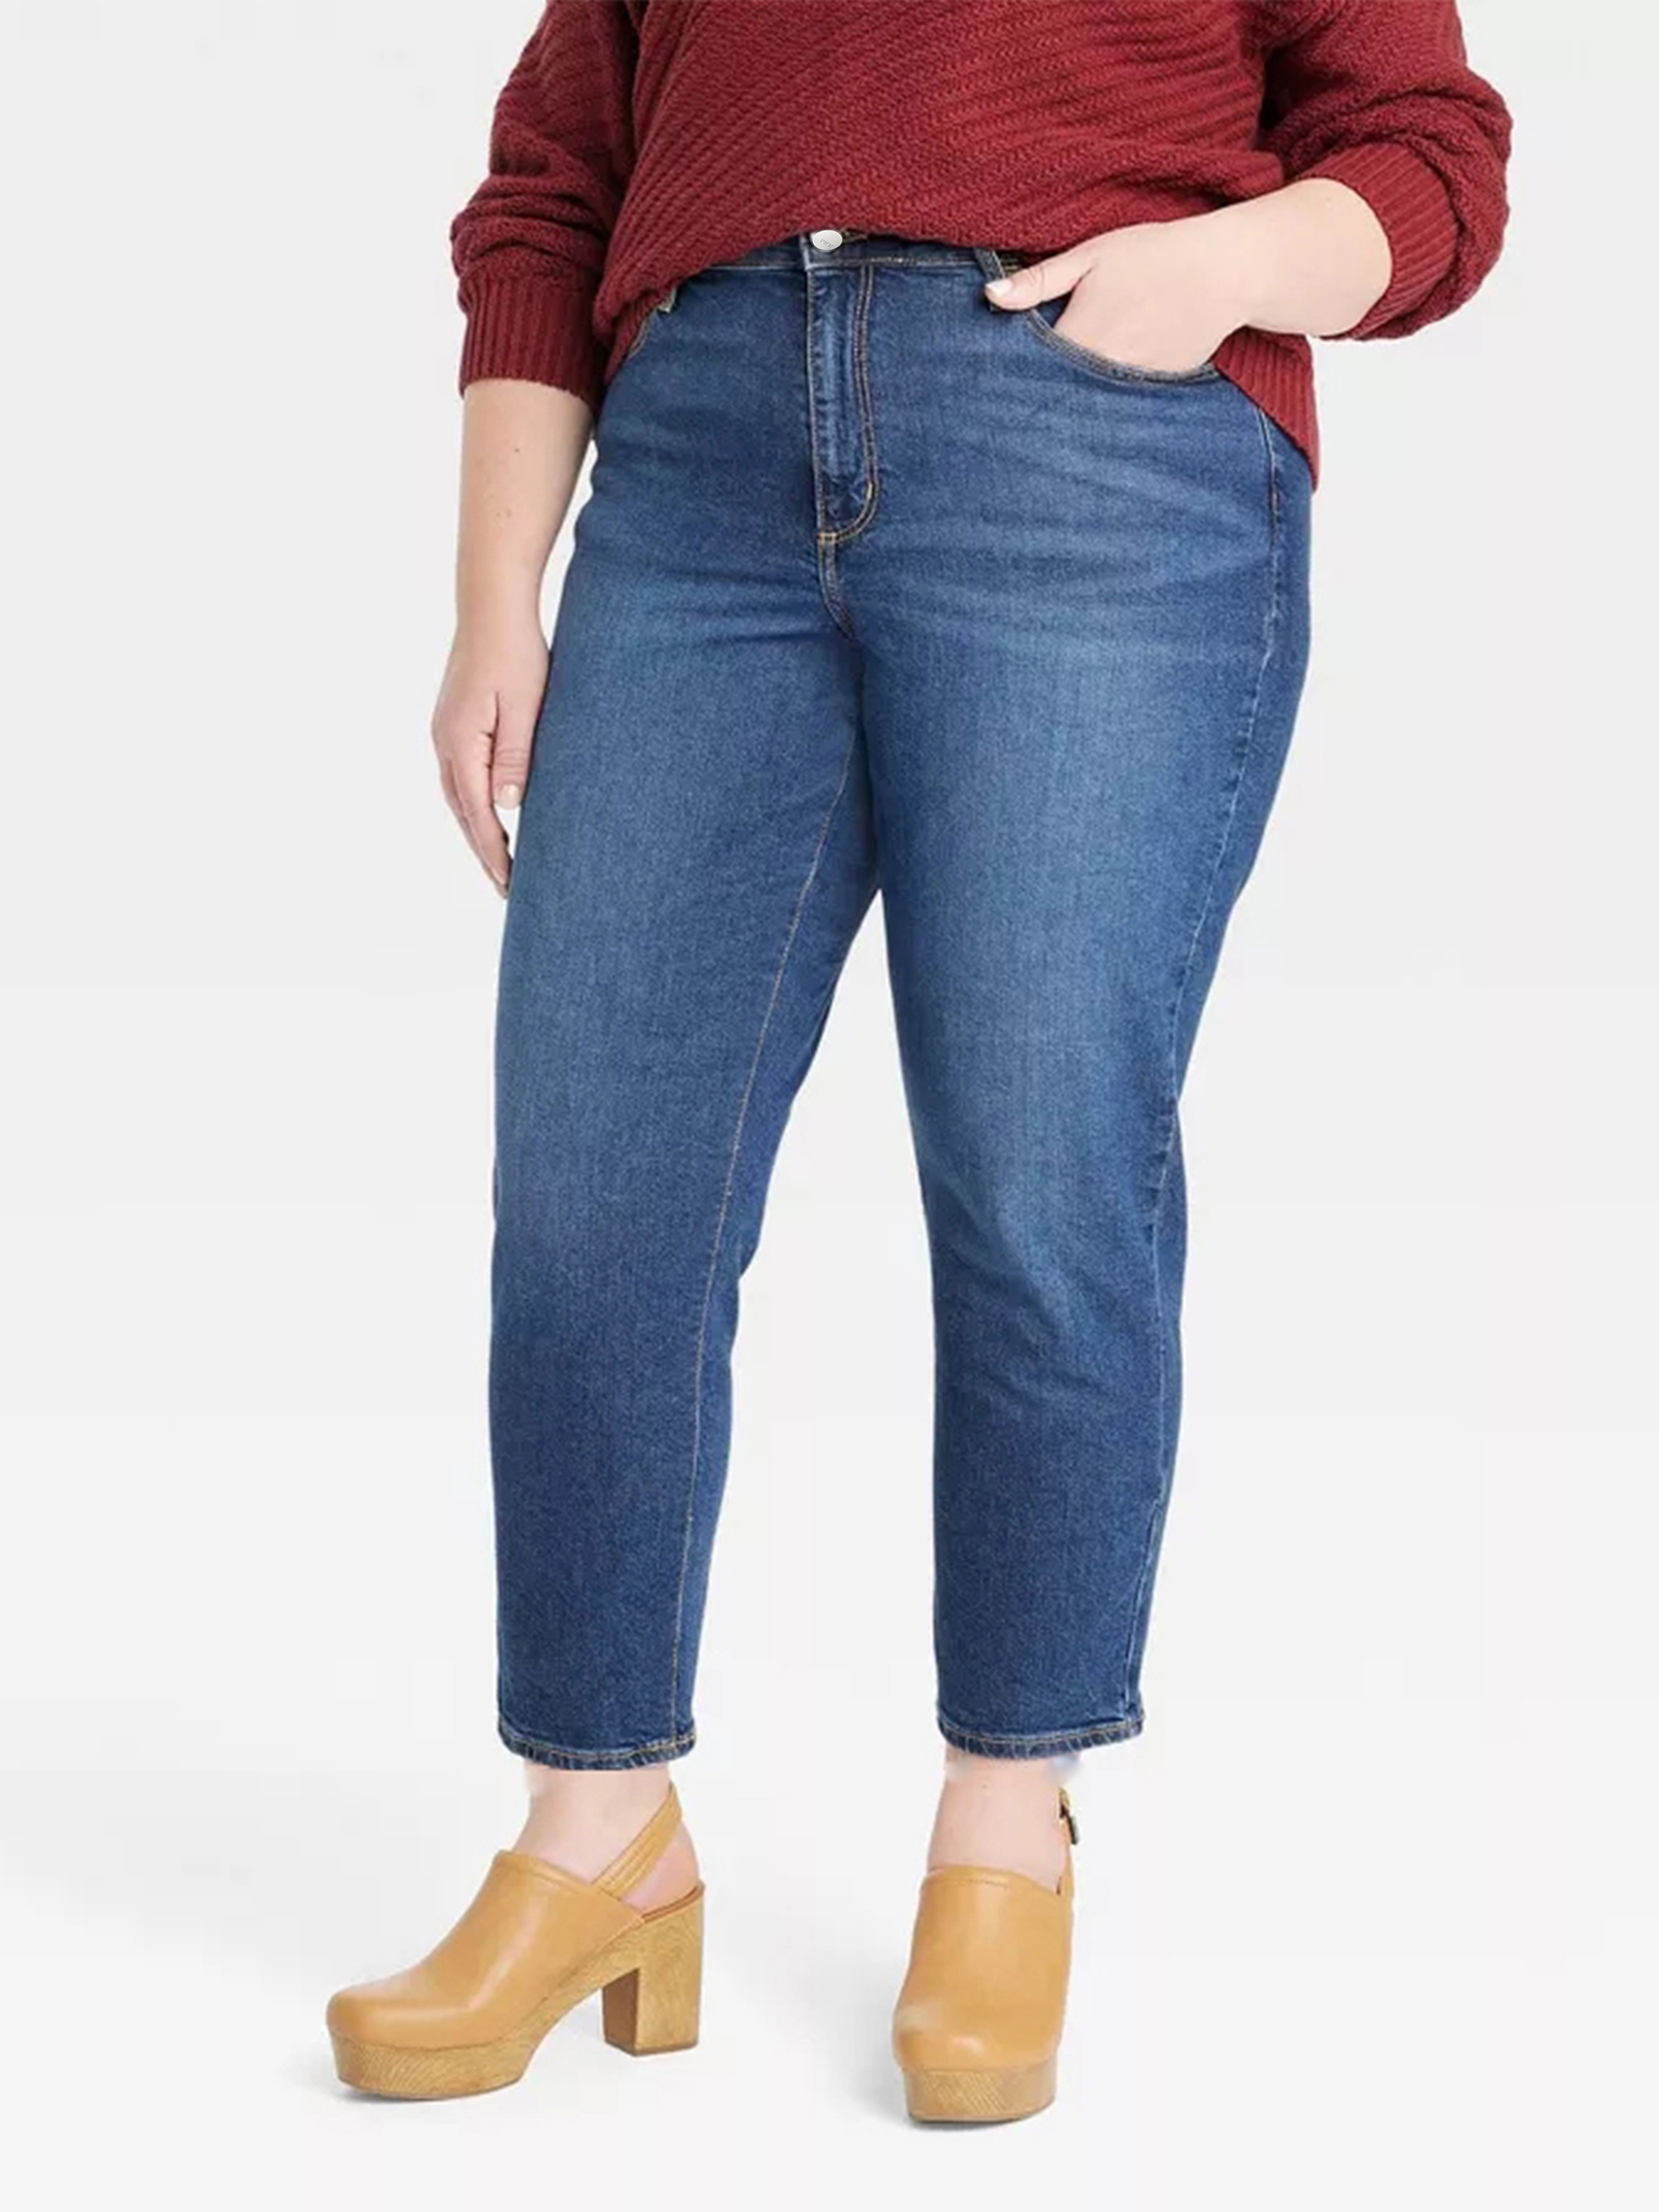 Plus Size Casual Jeans, Women's Plus High * Tummy Control High Stretch  Washed Skinny Jeans